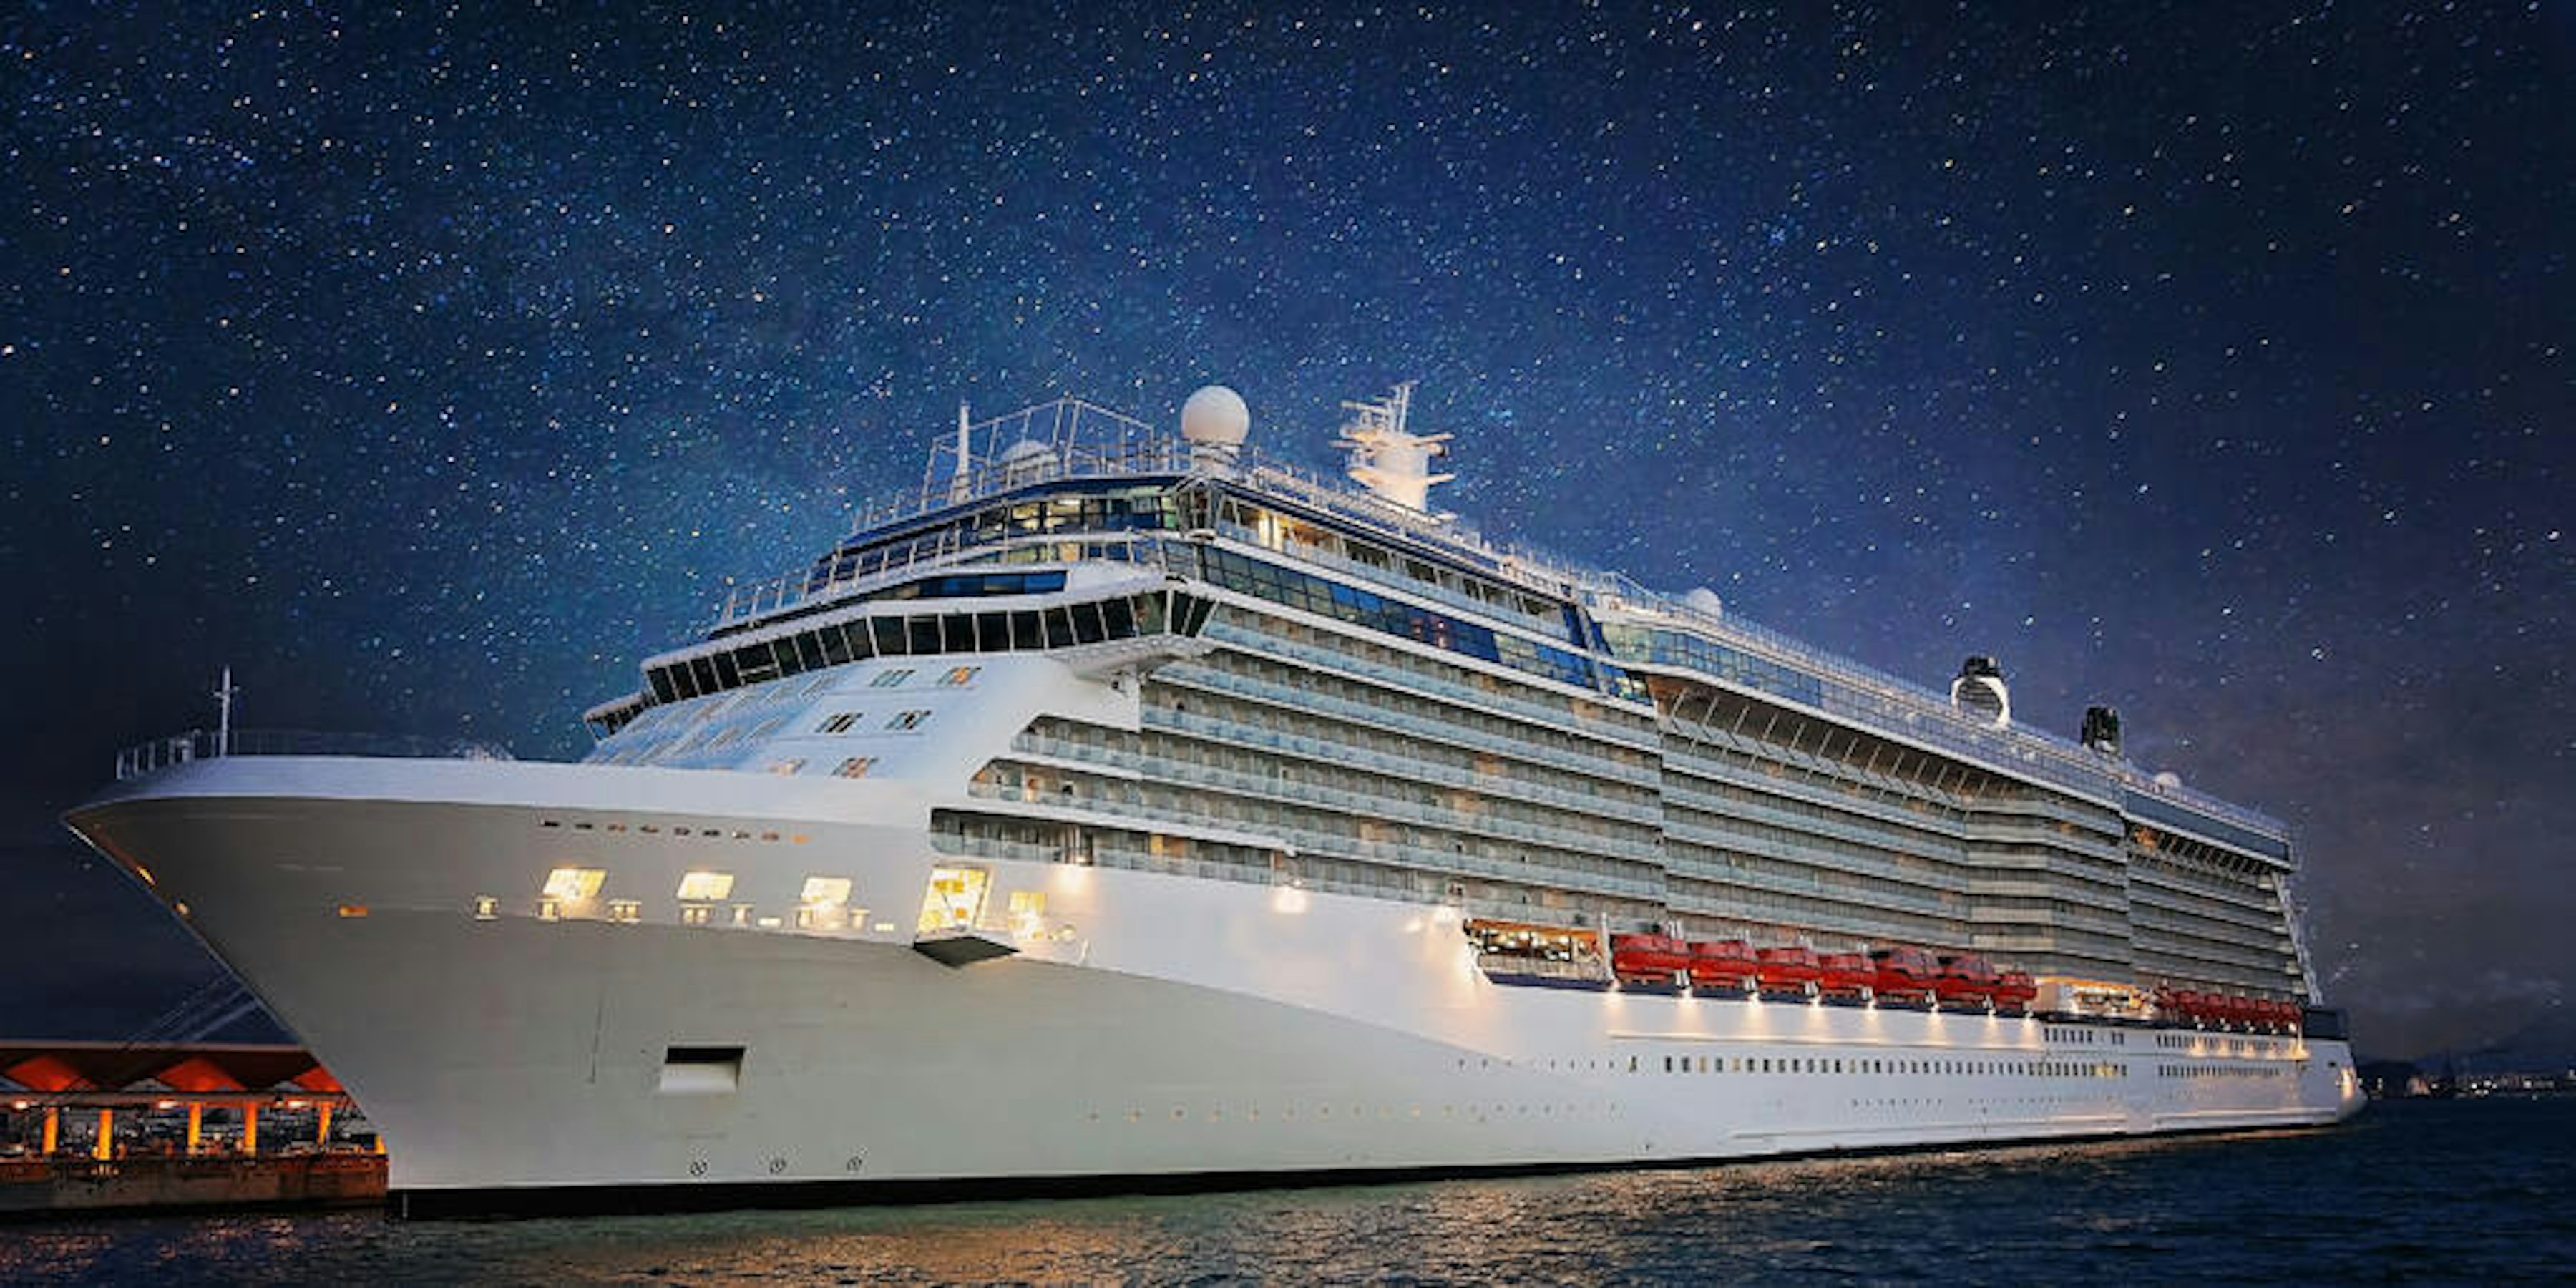 stargazing from a cruise ship